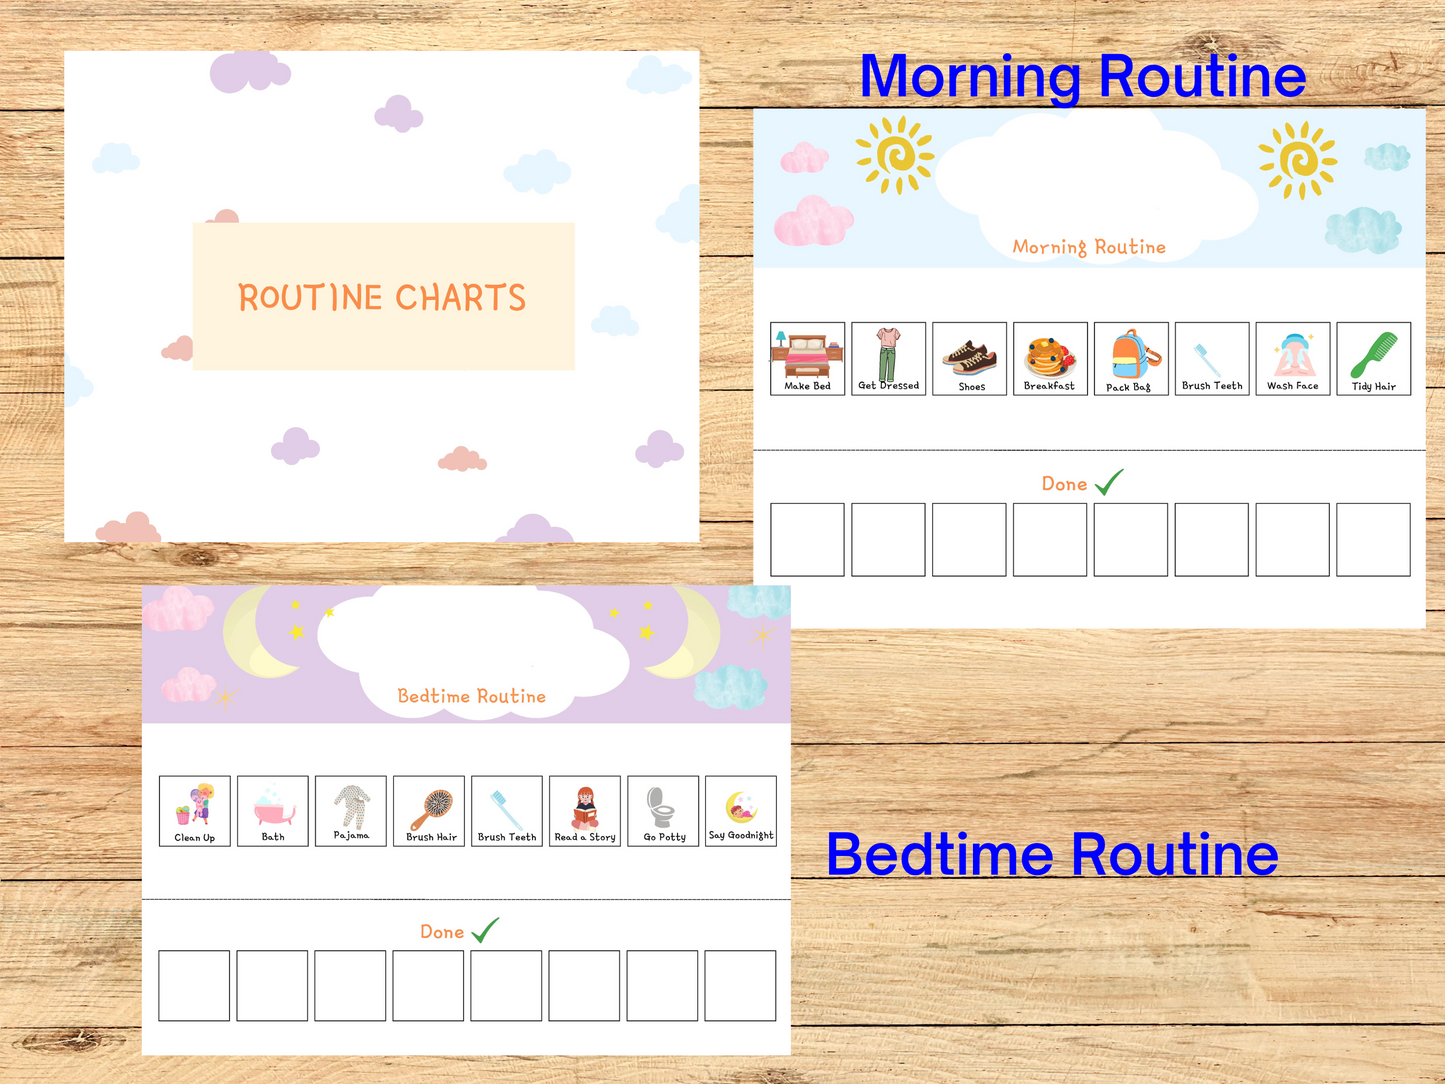 Cover page, morning routine and bedtime routine charts.